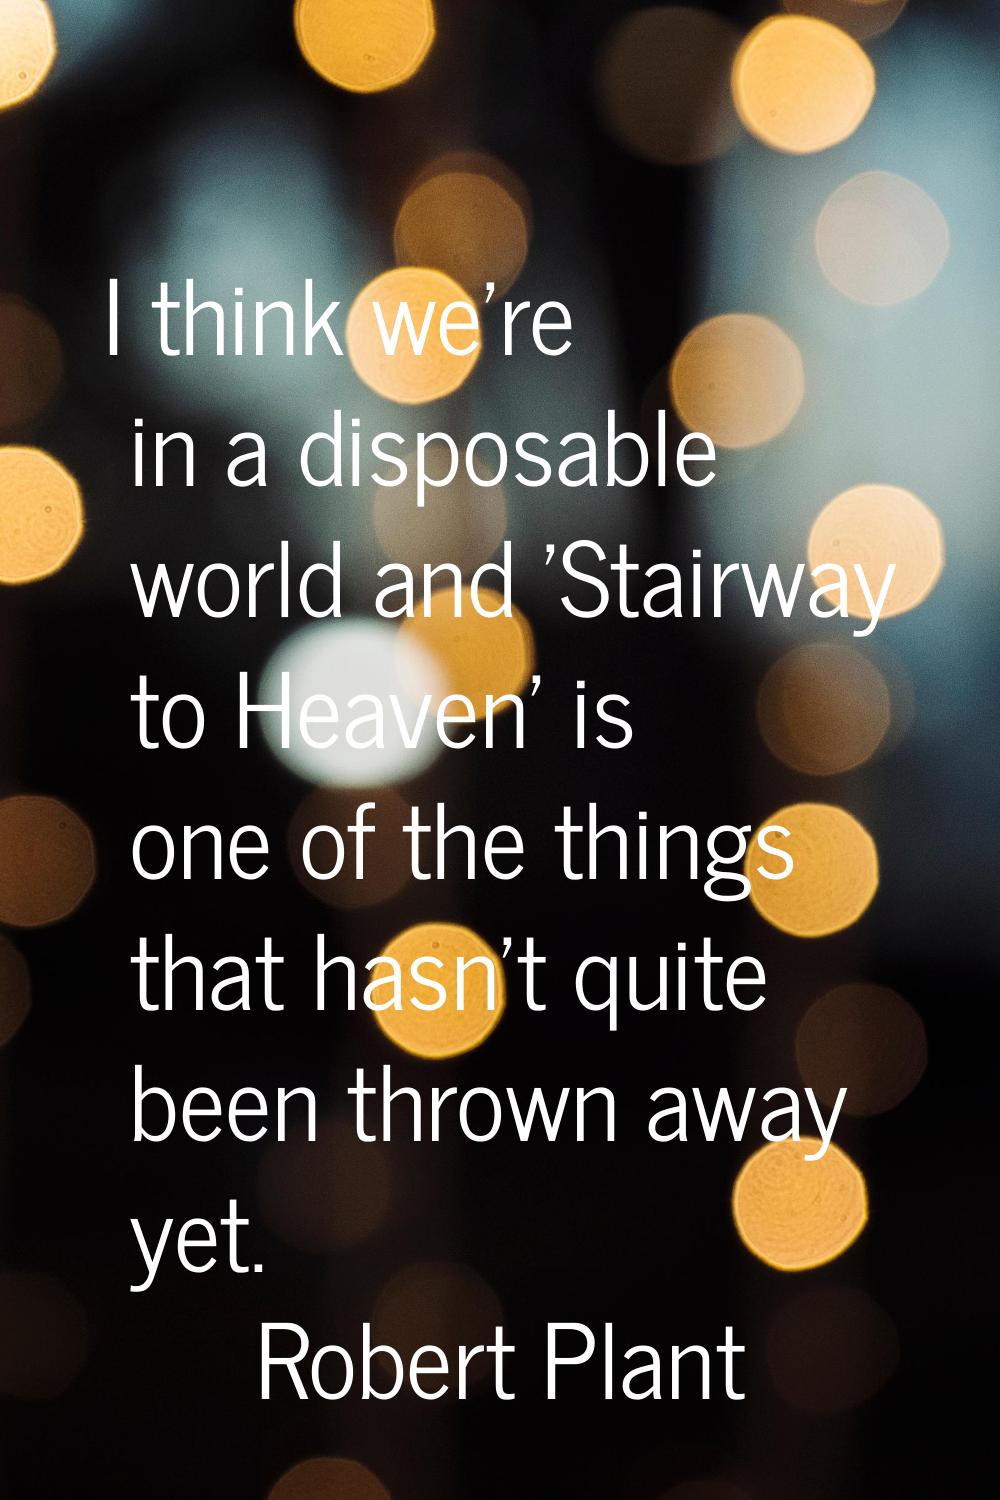 I think we're in a disposable world and 'Stairway to Heaven' is one of the things that hasn't quite